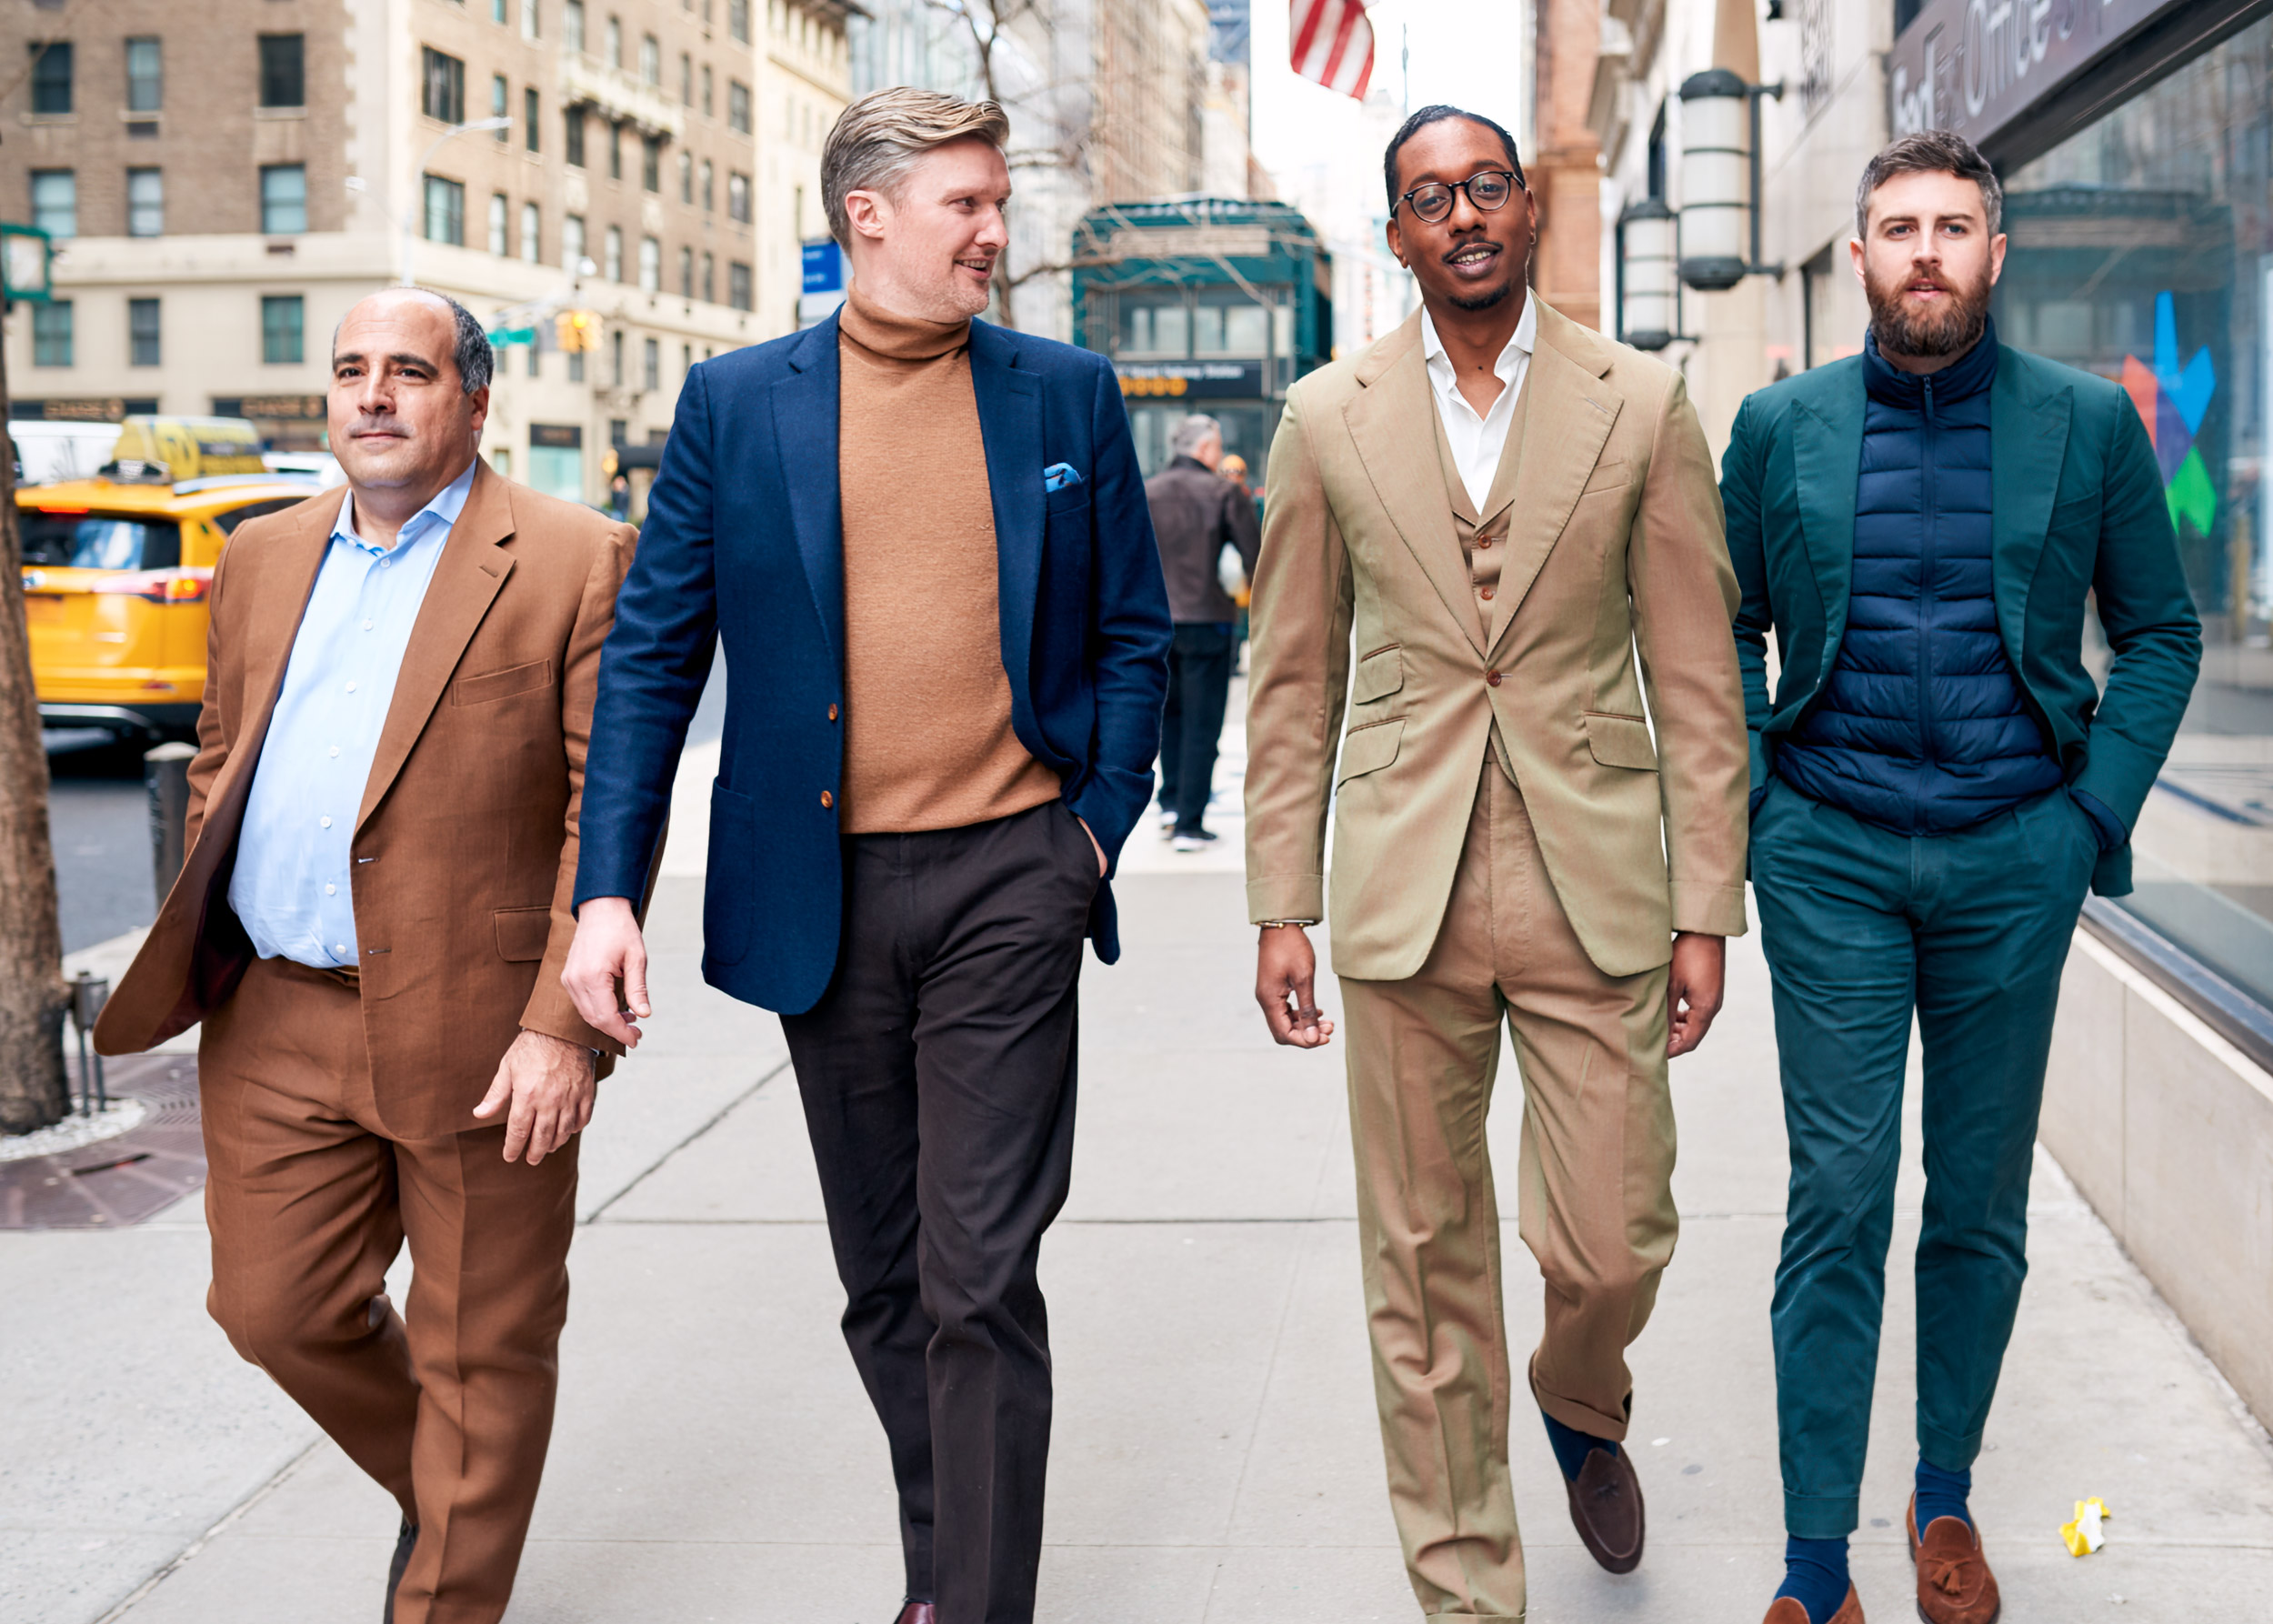 THE LADS FROM CAD AND THE DANDY  STRUT DOW THE STREET IN THEIR TAILORED OUTFITS IN NEW YORK CITY